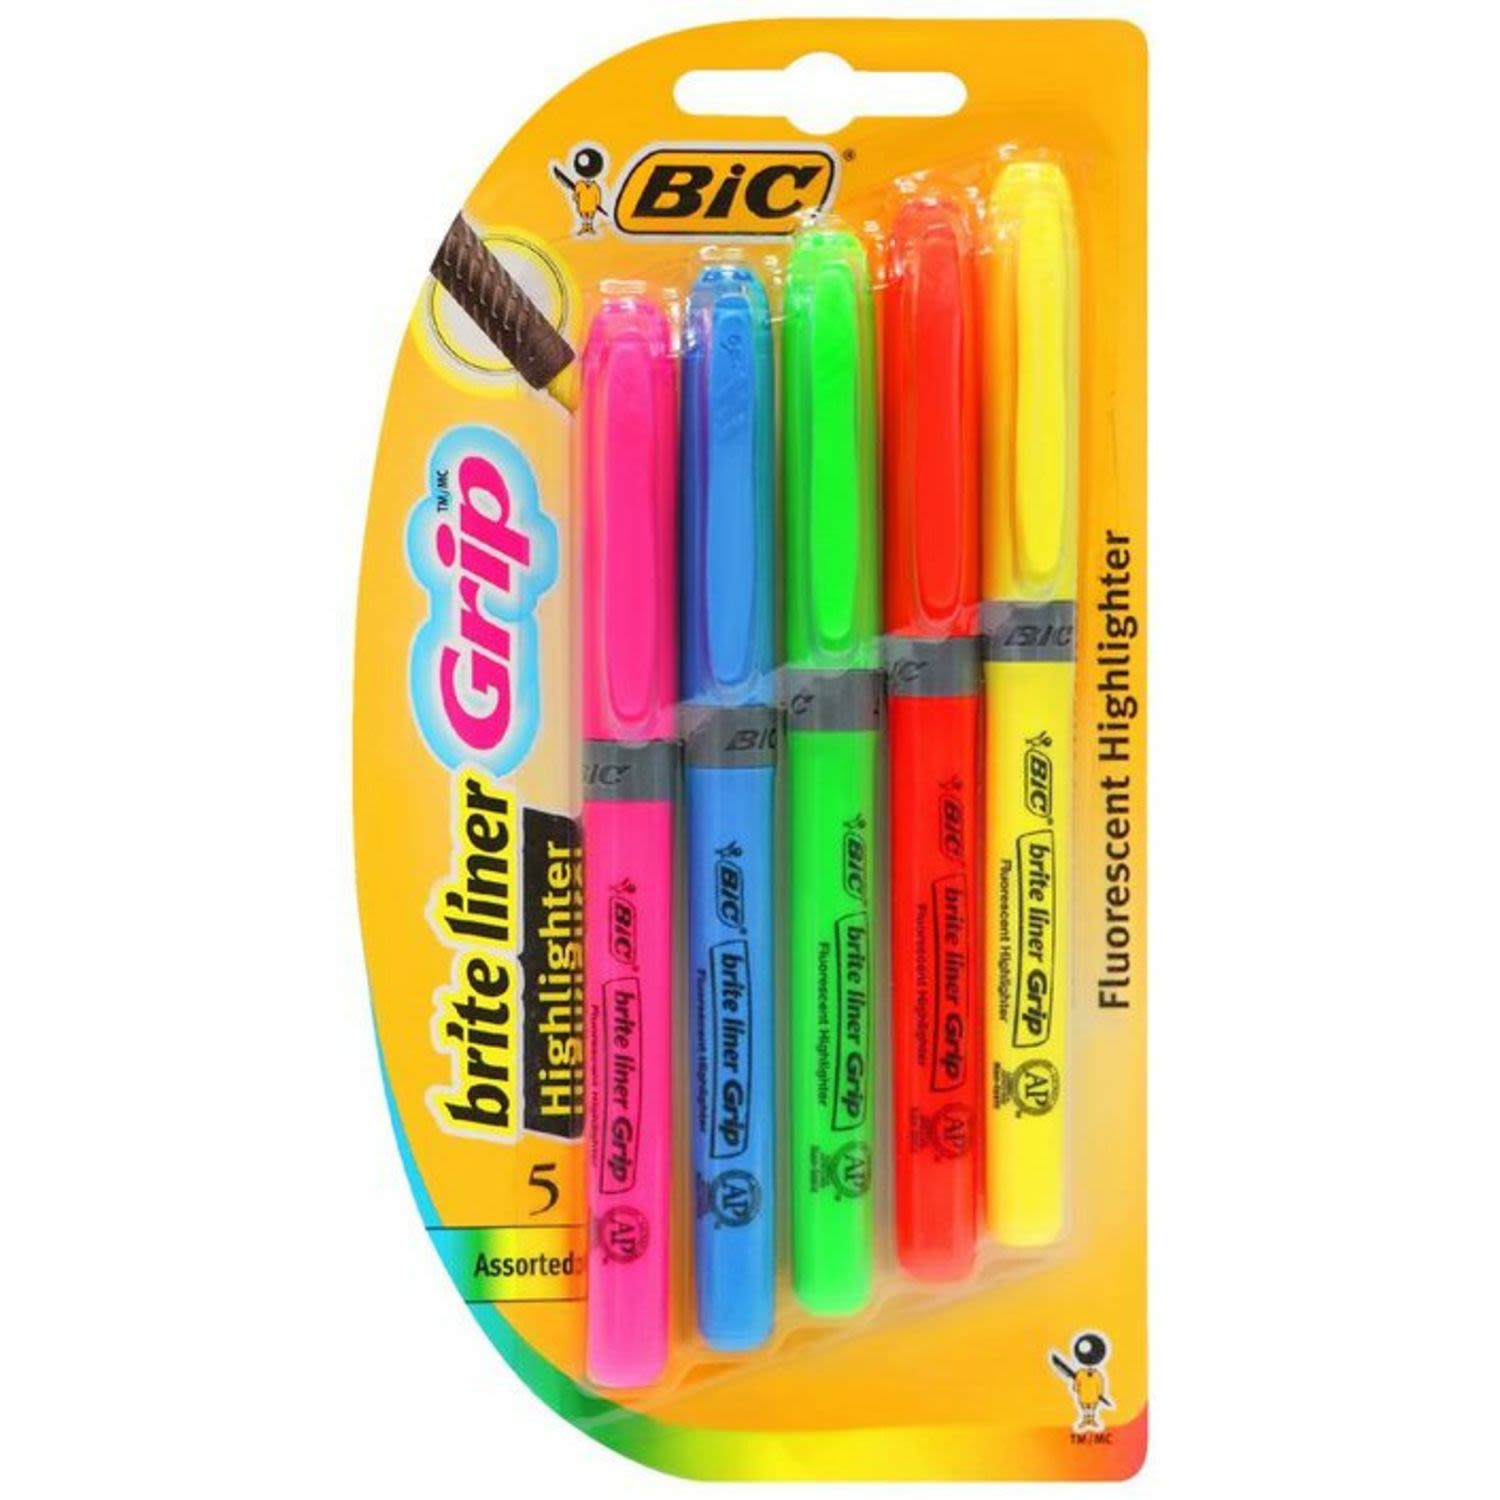 BiC Brite Liner Grip Highlighters Assorted, 5 Each